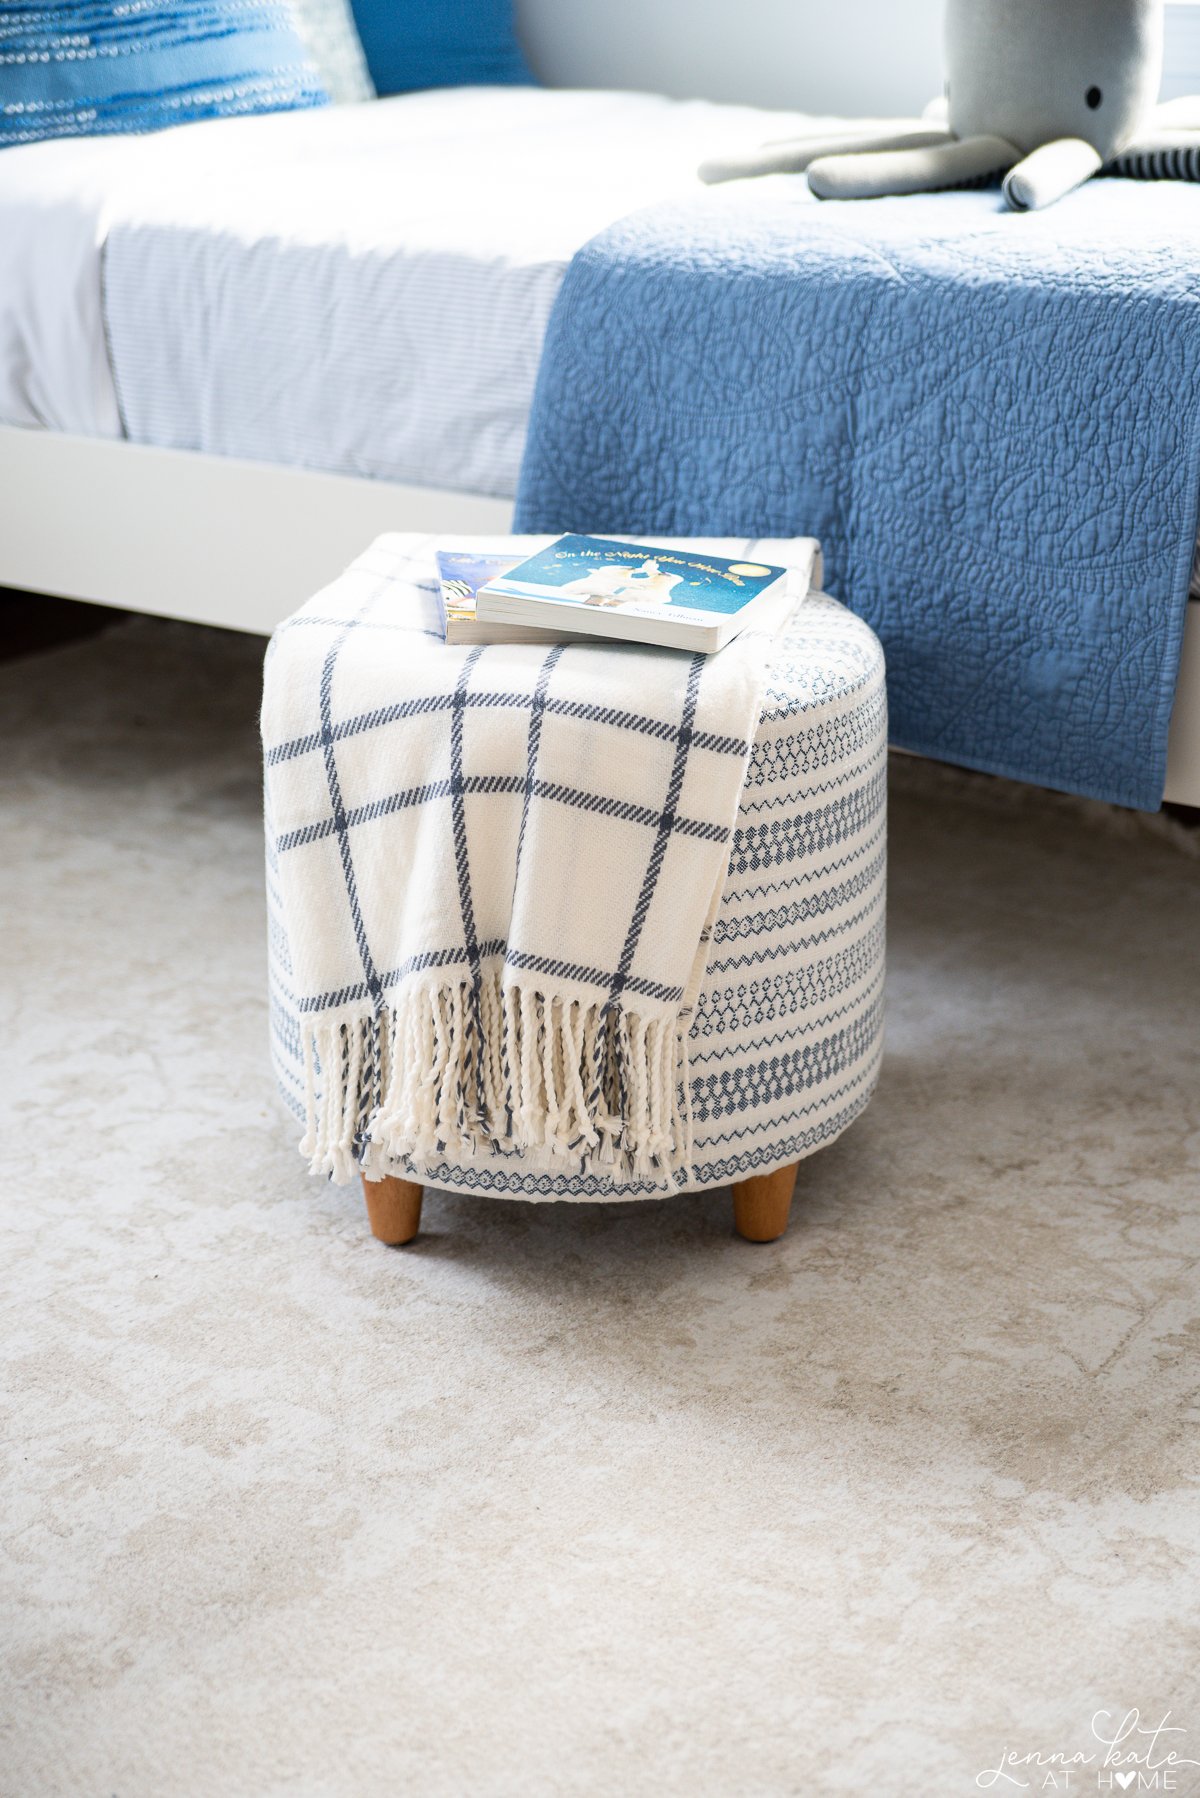 plaid blanket draped over a footstool